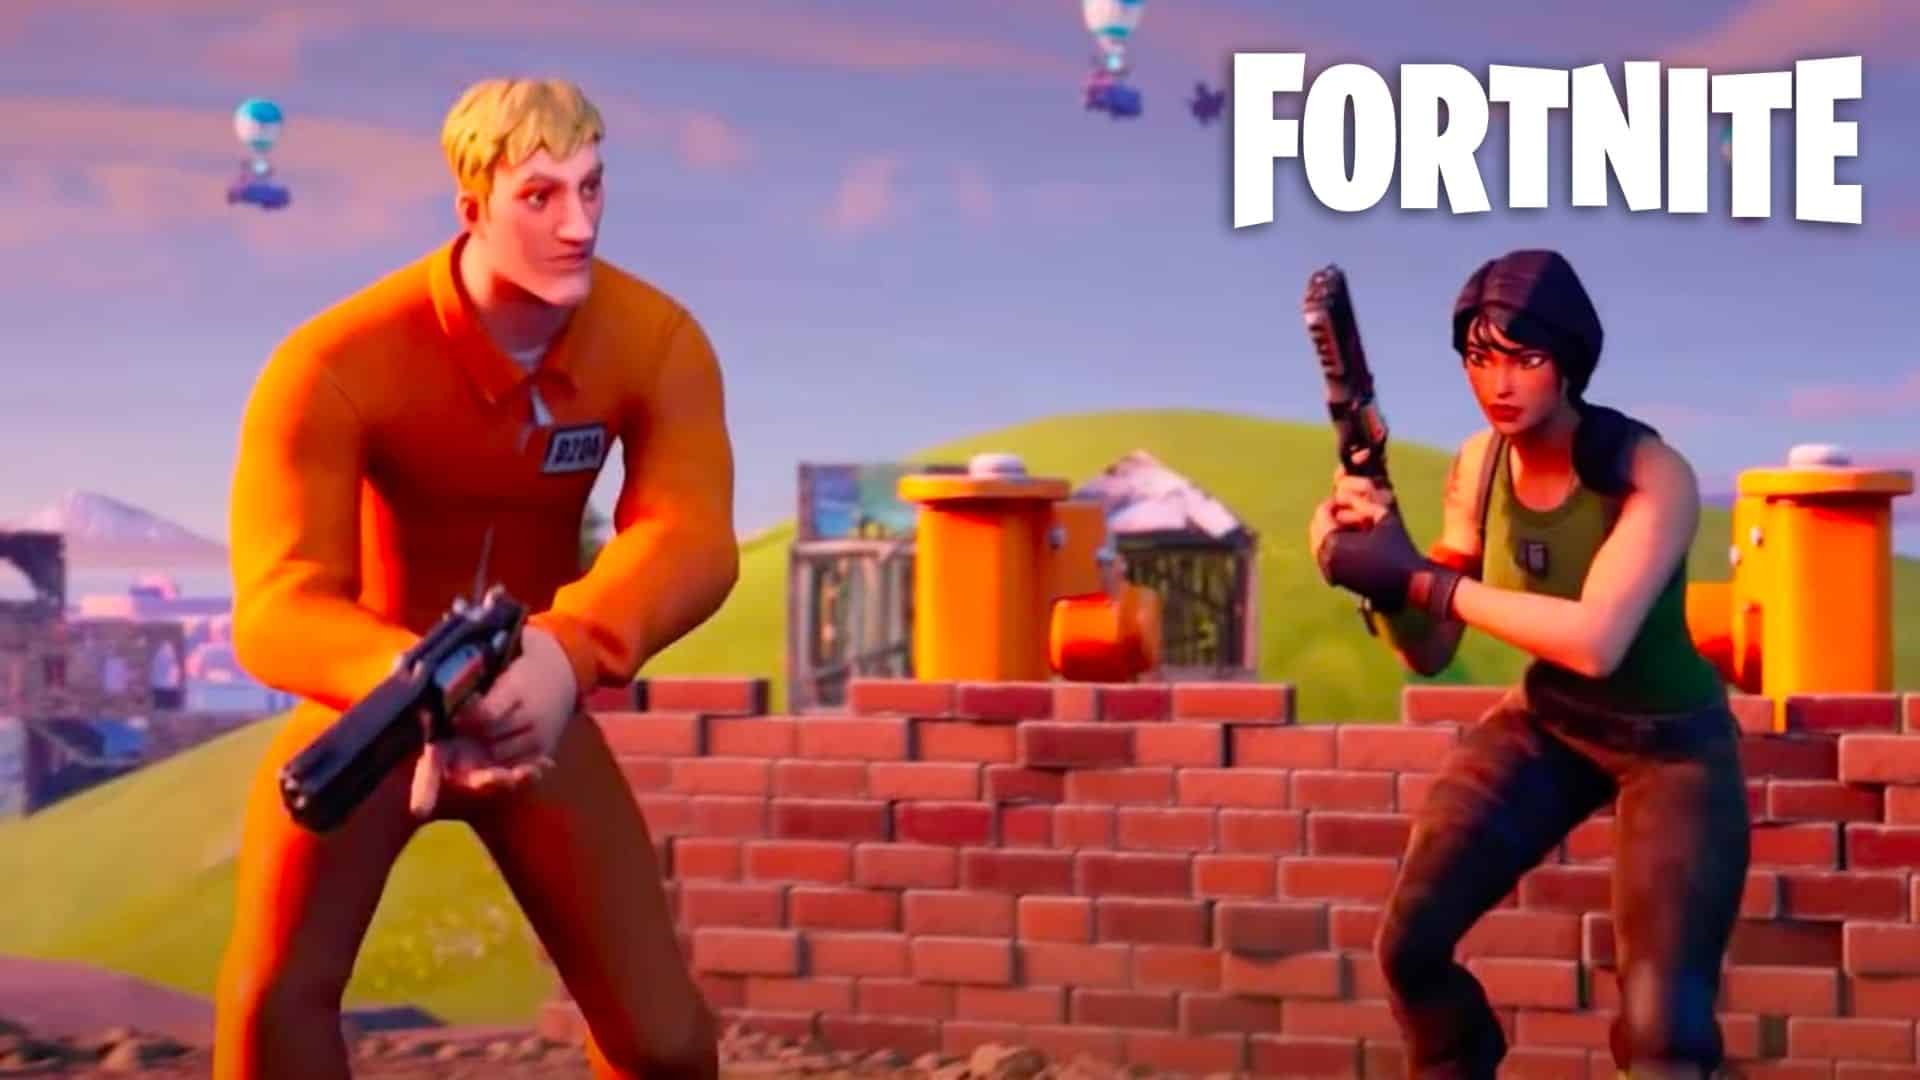 Fortnite characters holding weapons and pistols